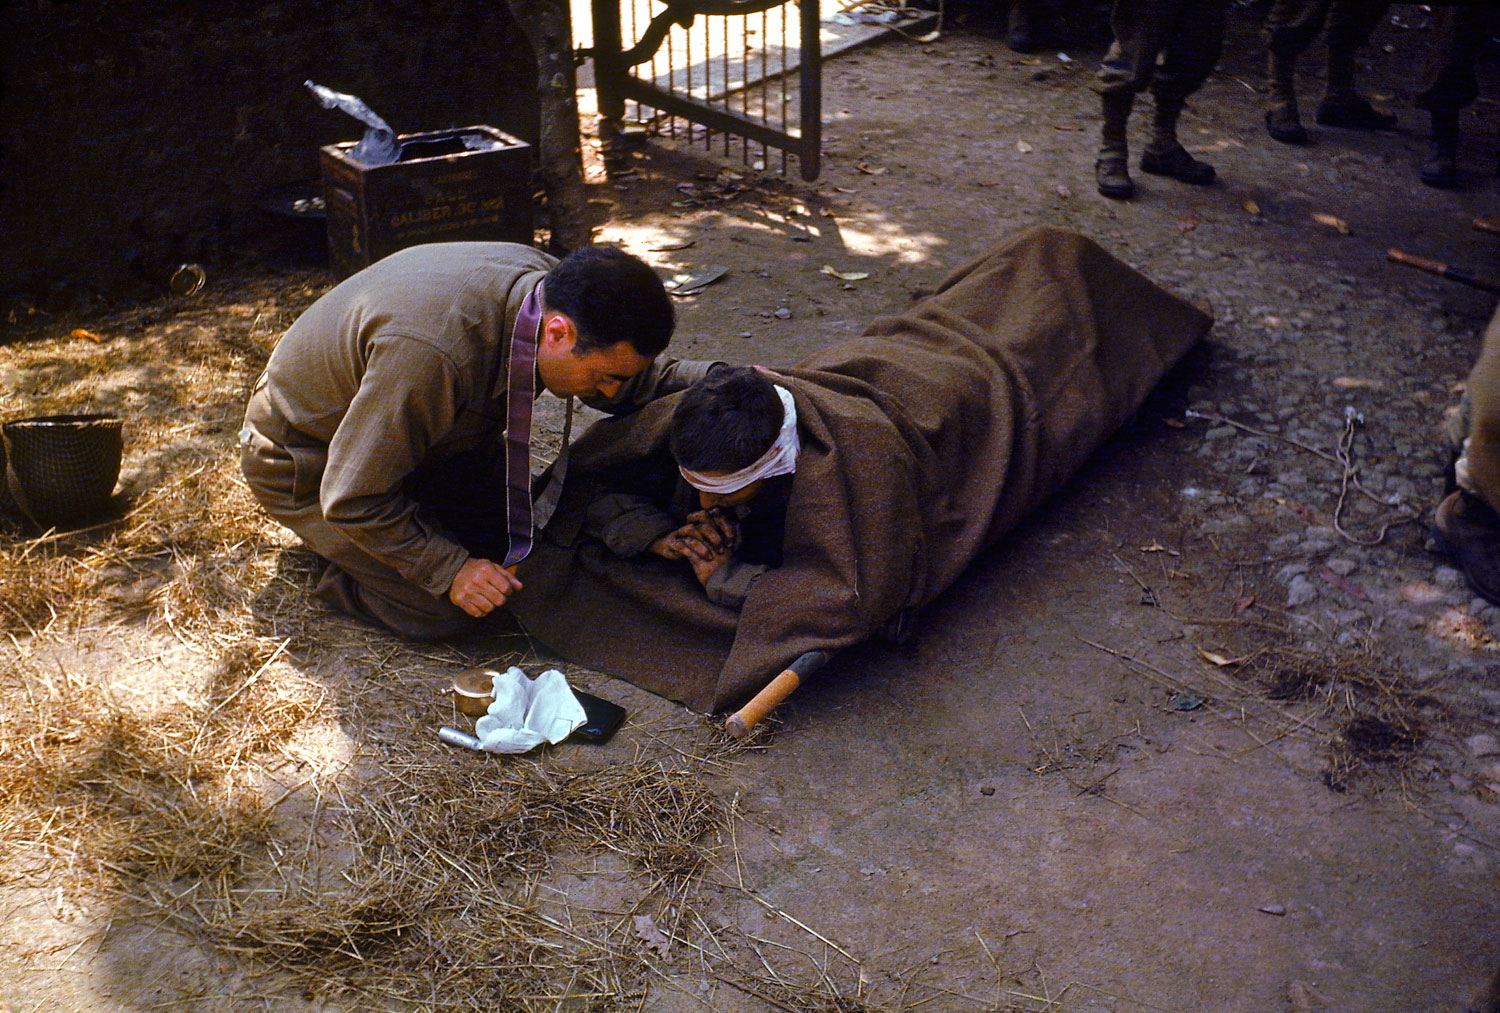 An American Army chaplain kneels next to a wounded soldier in order to administer the Eucharist and Last Rites, France, 1944.